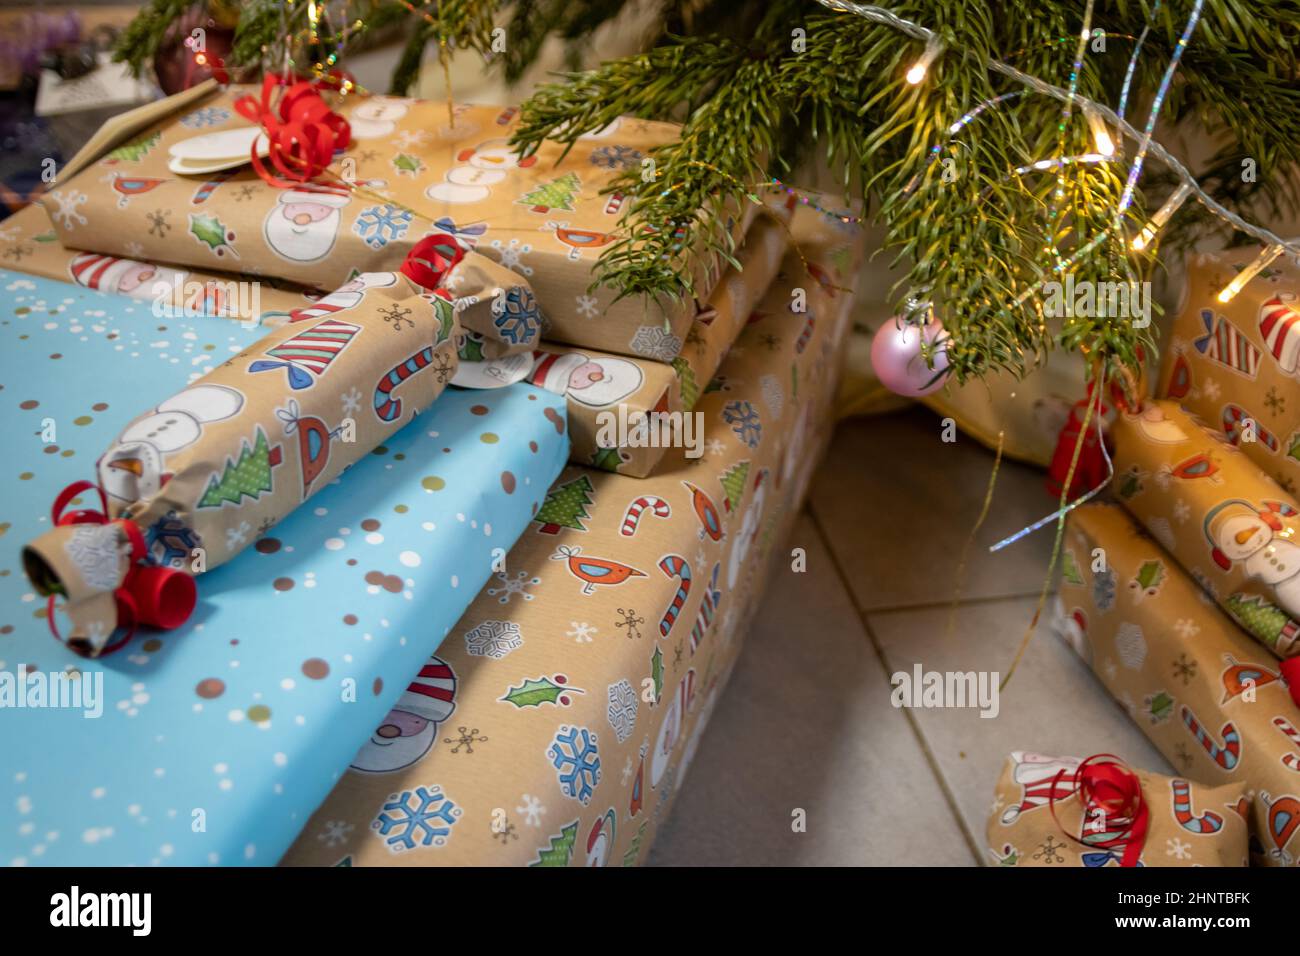 Festive wrapped Christmas gifts and Christmas presents under the xmas tree shows decorative unboxing event with traditional celebration of handmade winter season for sparkling children eyes beauty Stock Photo